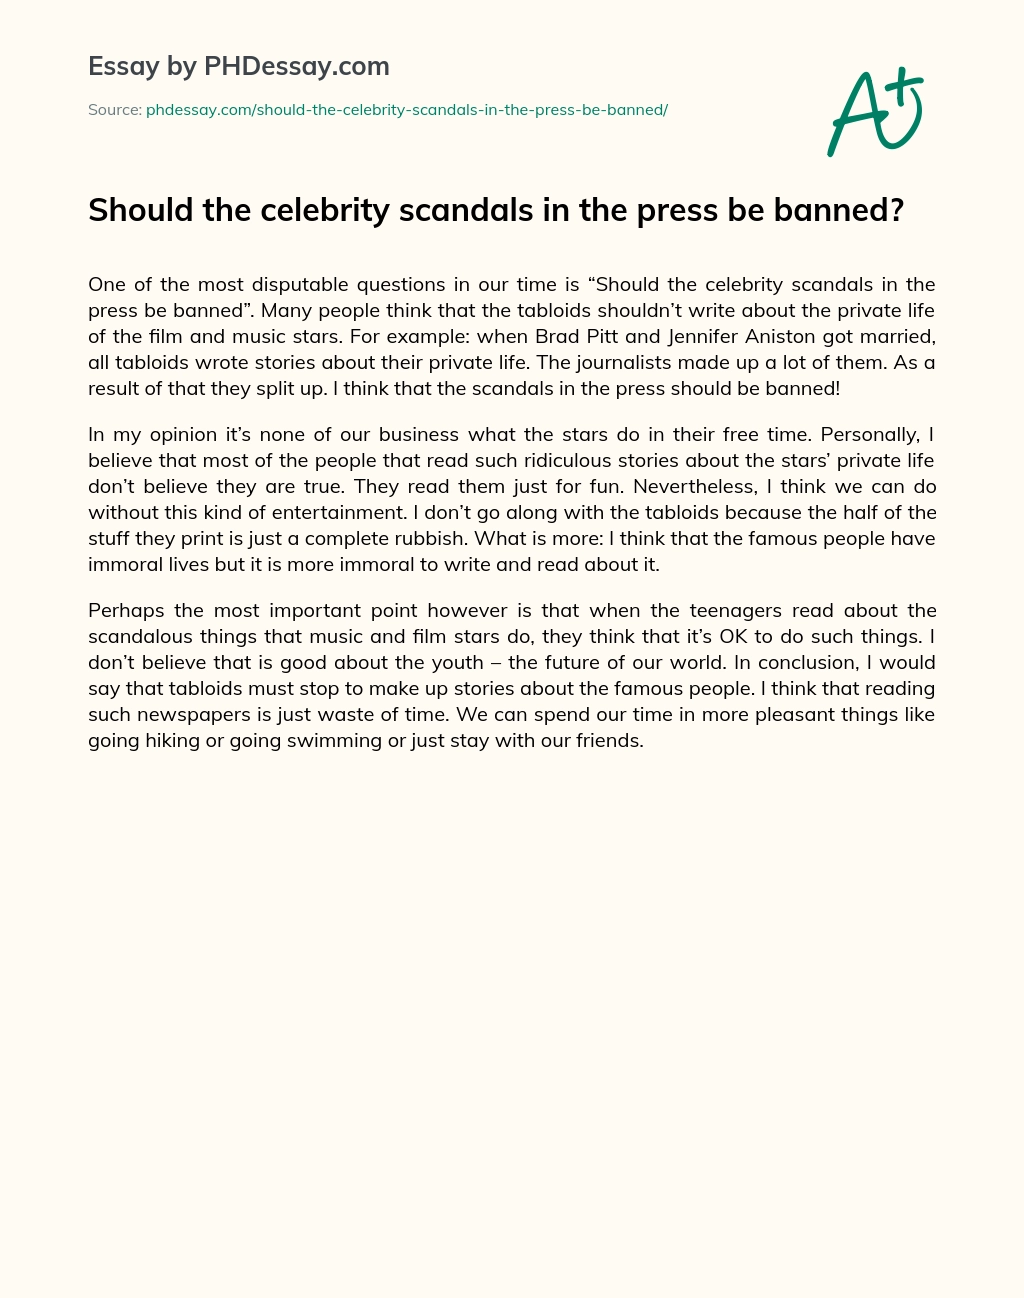 Should the celebrity scandals in the press be banned? essay